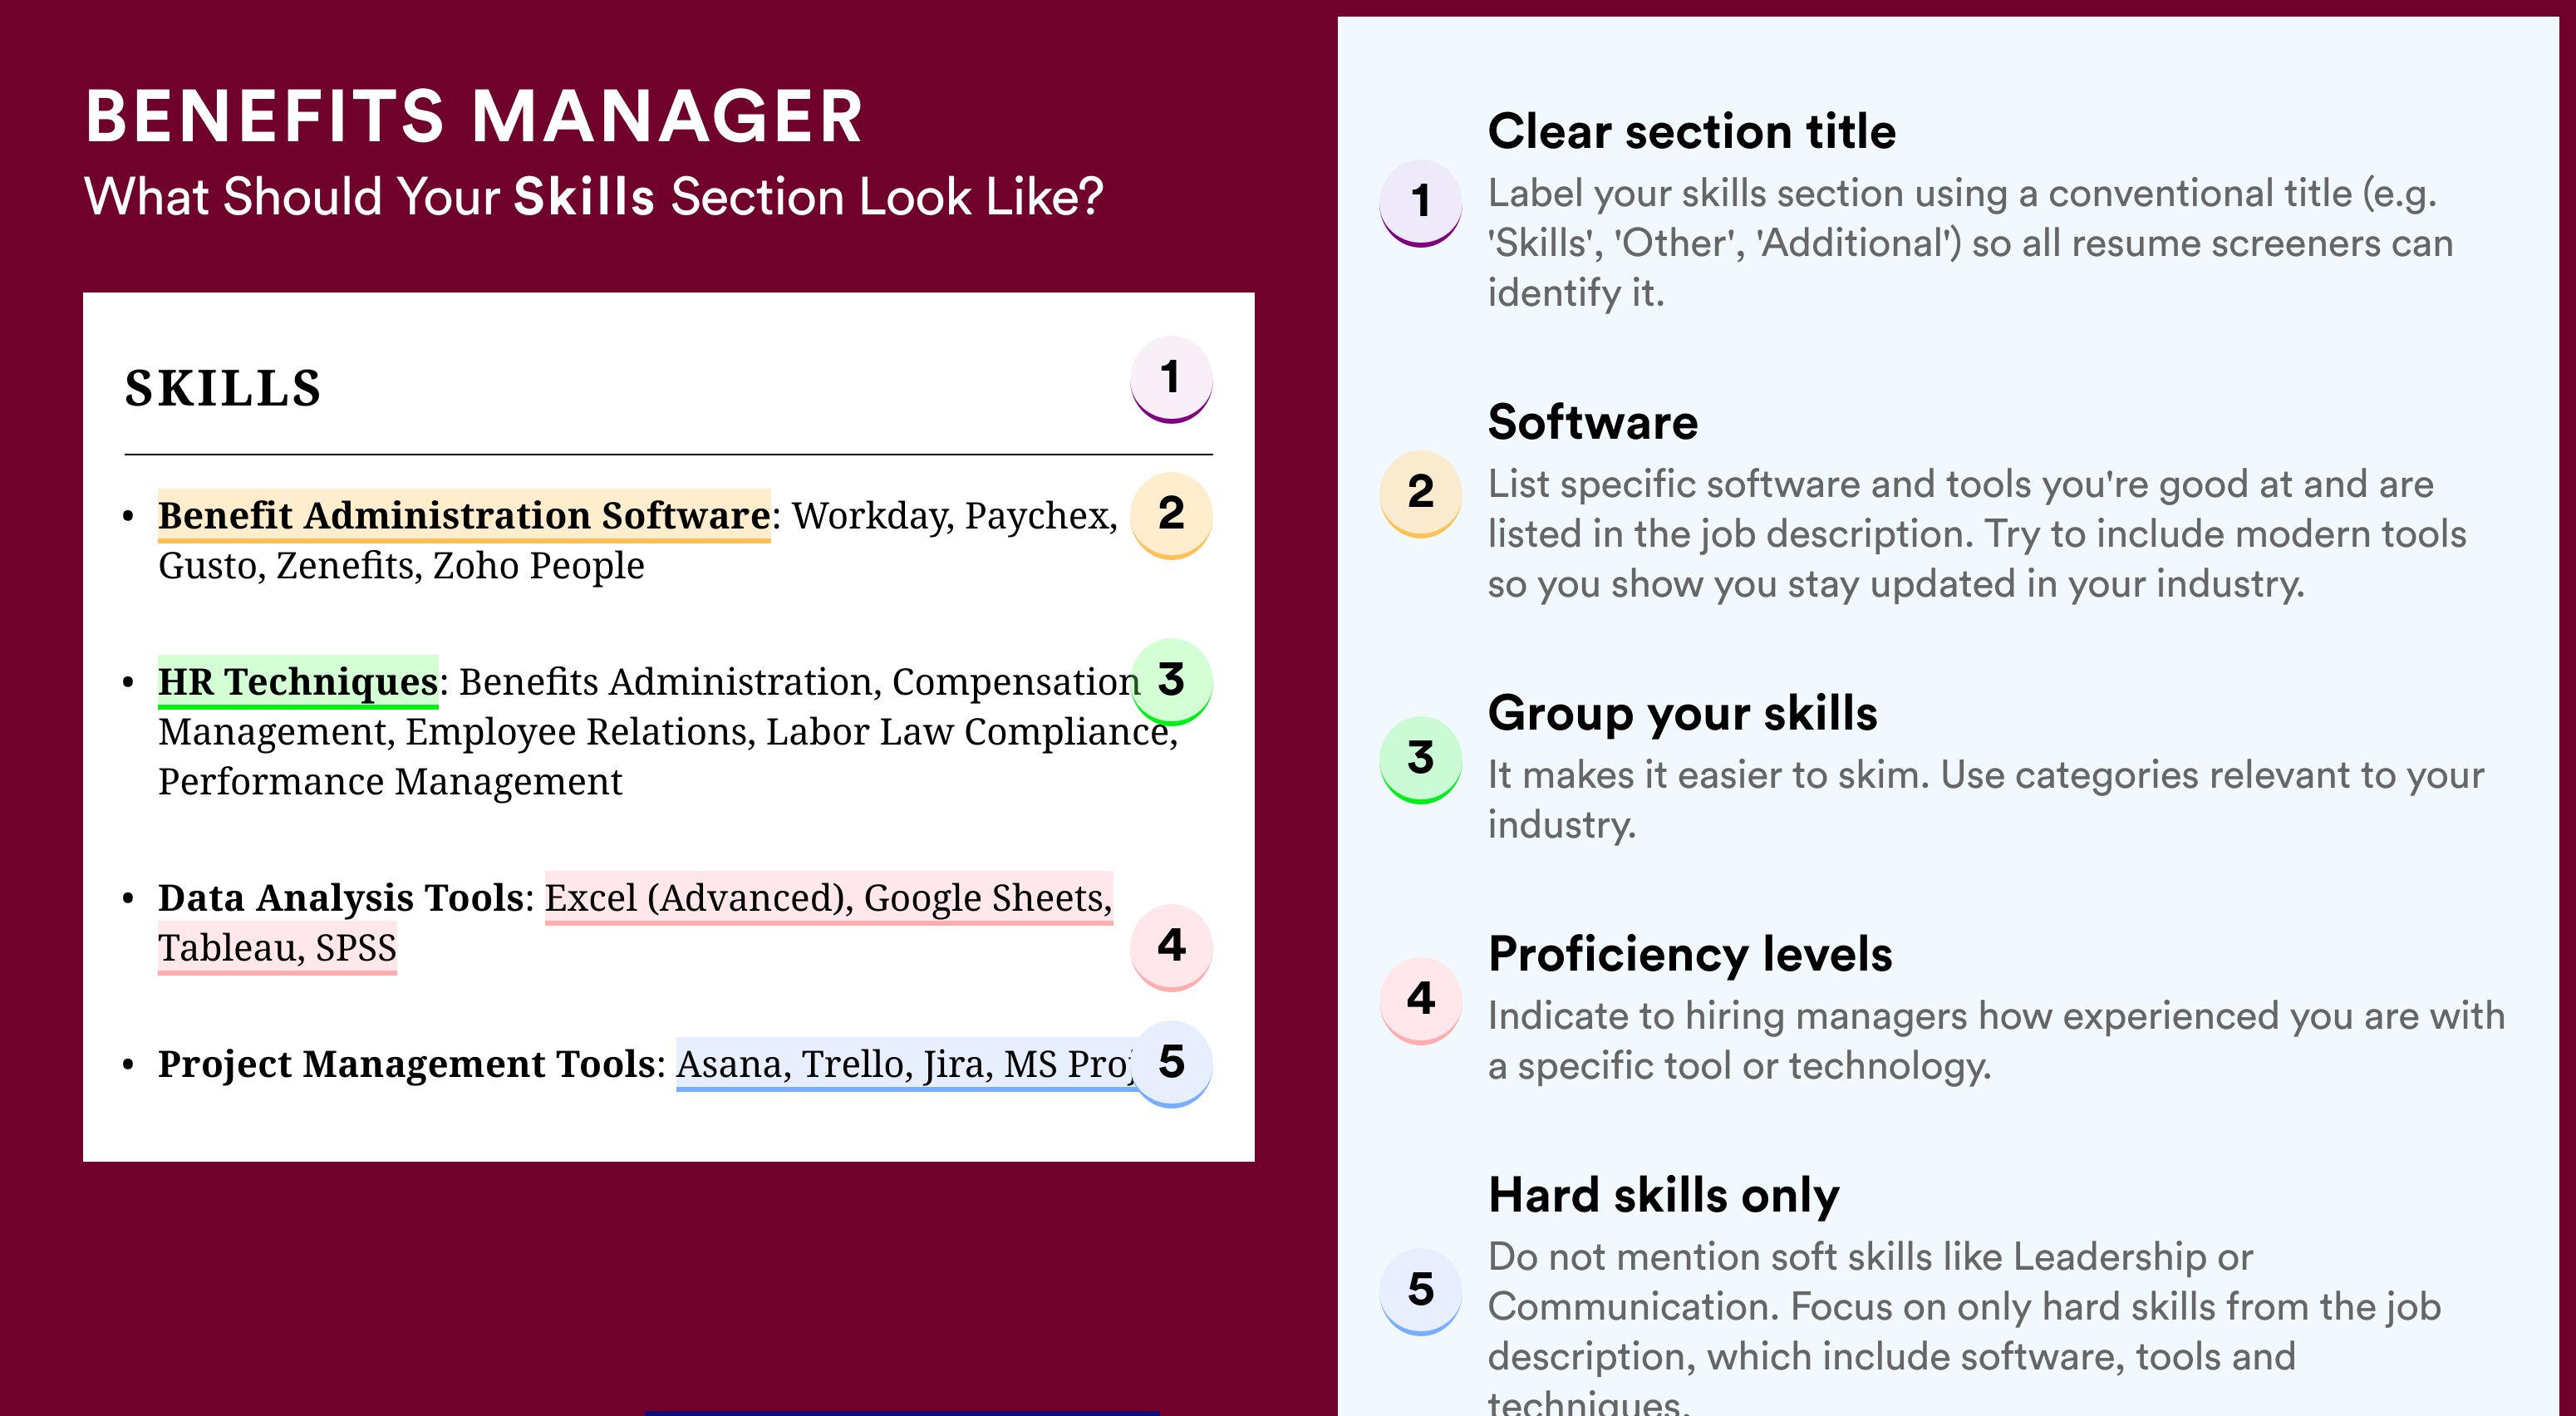 How To Write Your Skills Section - Benefits Manager Roles